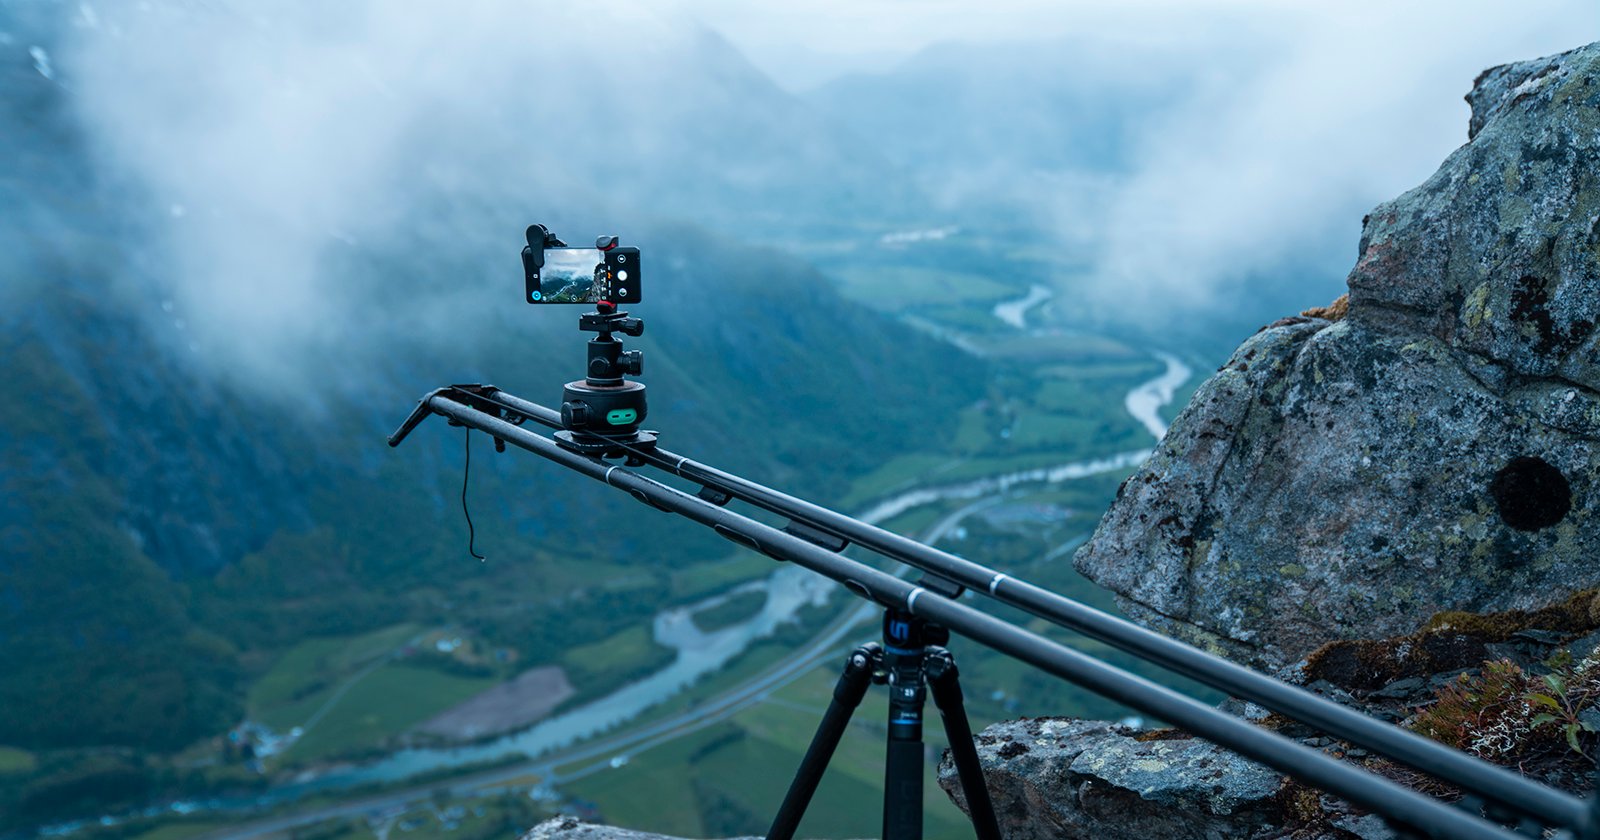 This Pro Tried to Shoot a Professional-Grade Timelapse on a Smartphone